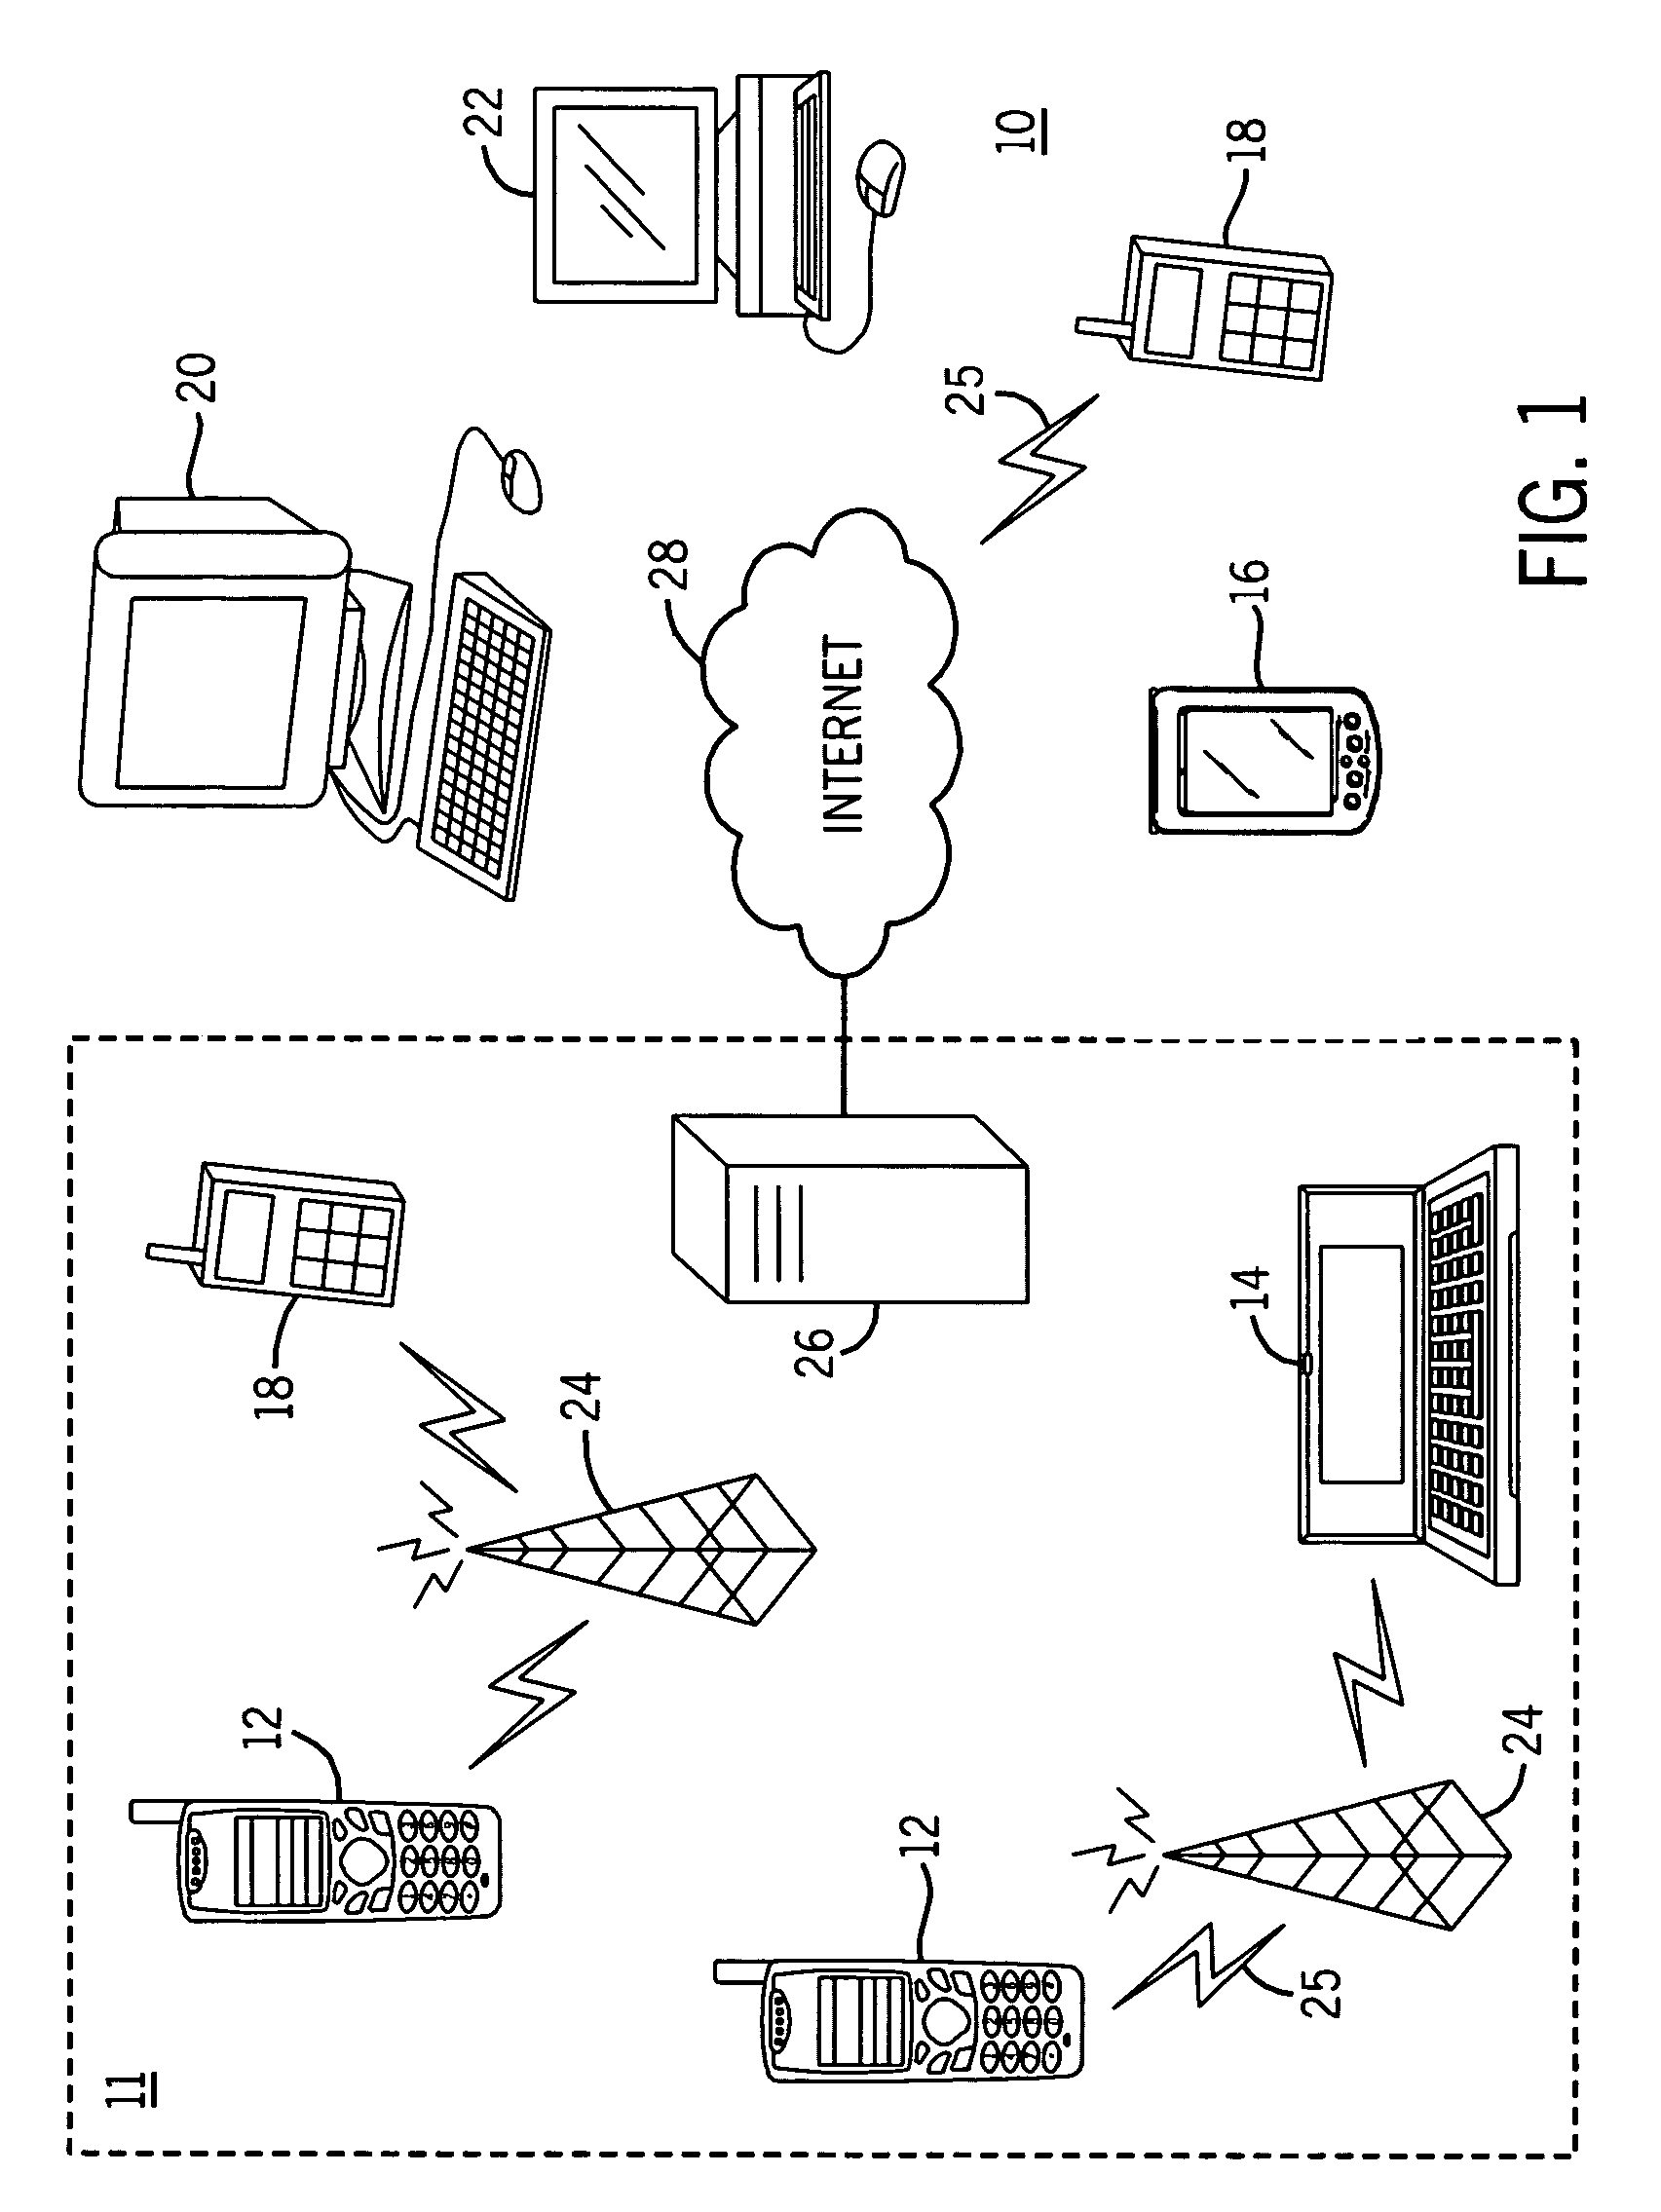 System and method for identifying segments in a web resource